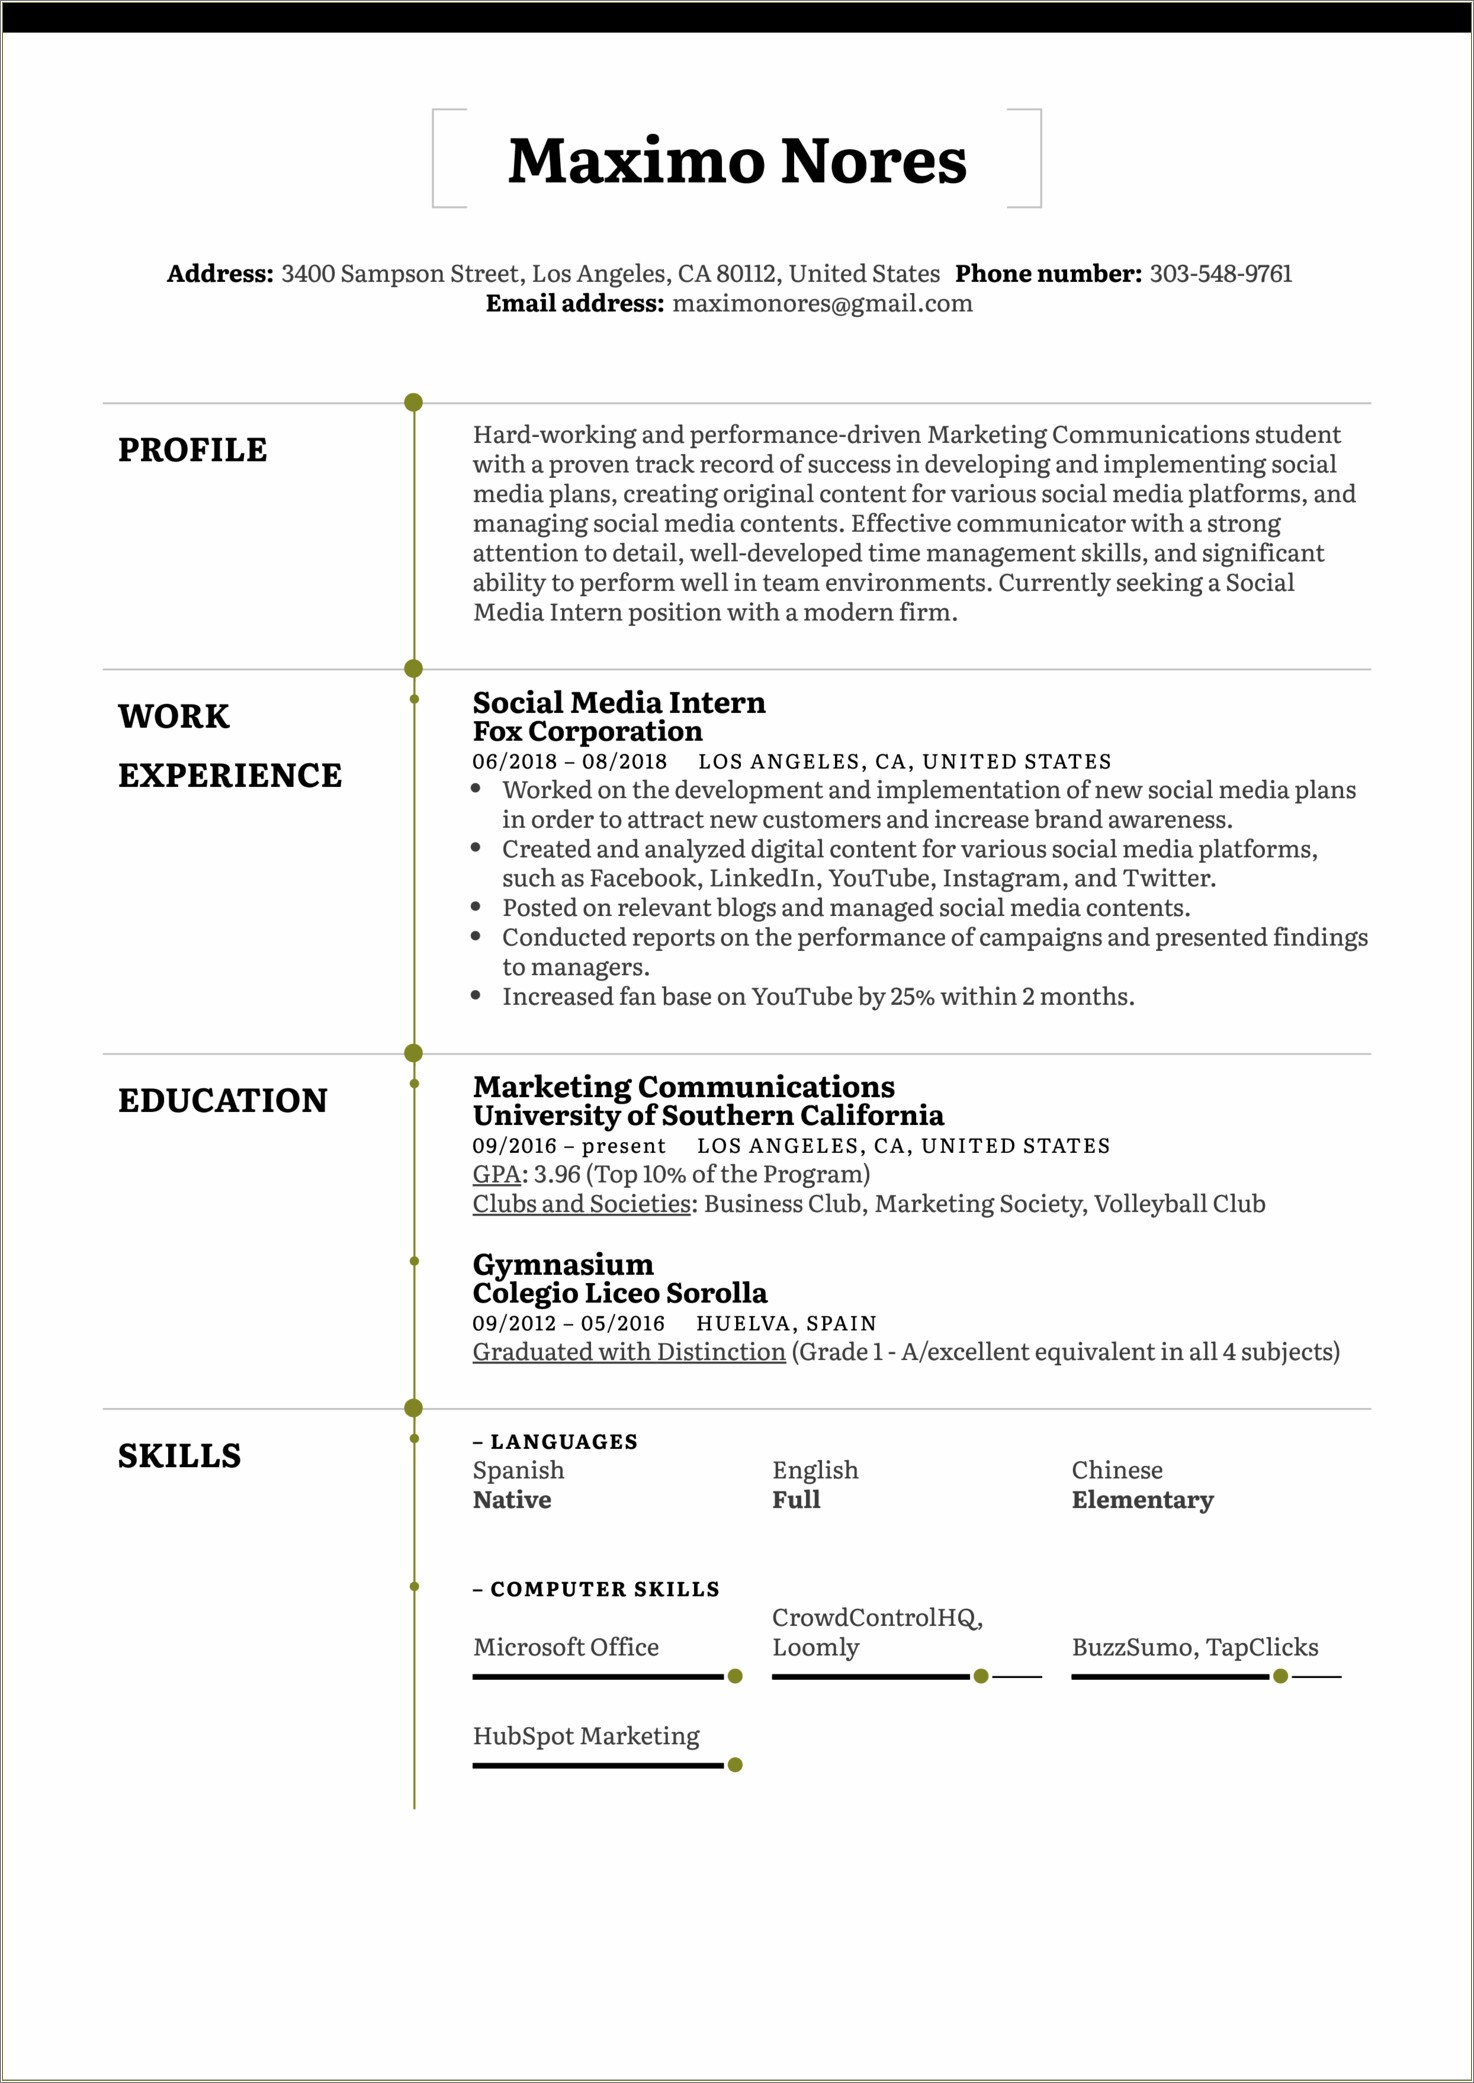 Examples Of Objectives For Social Work Resume